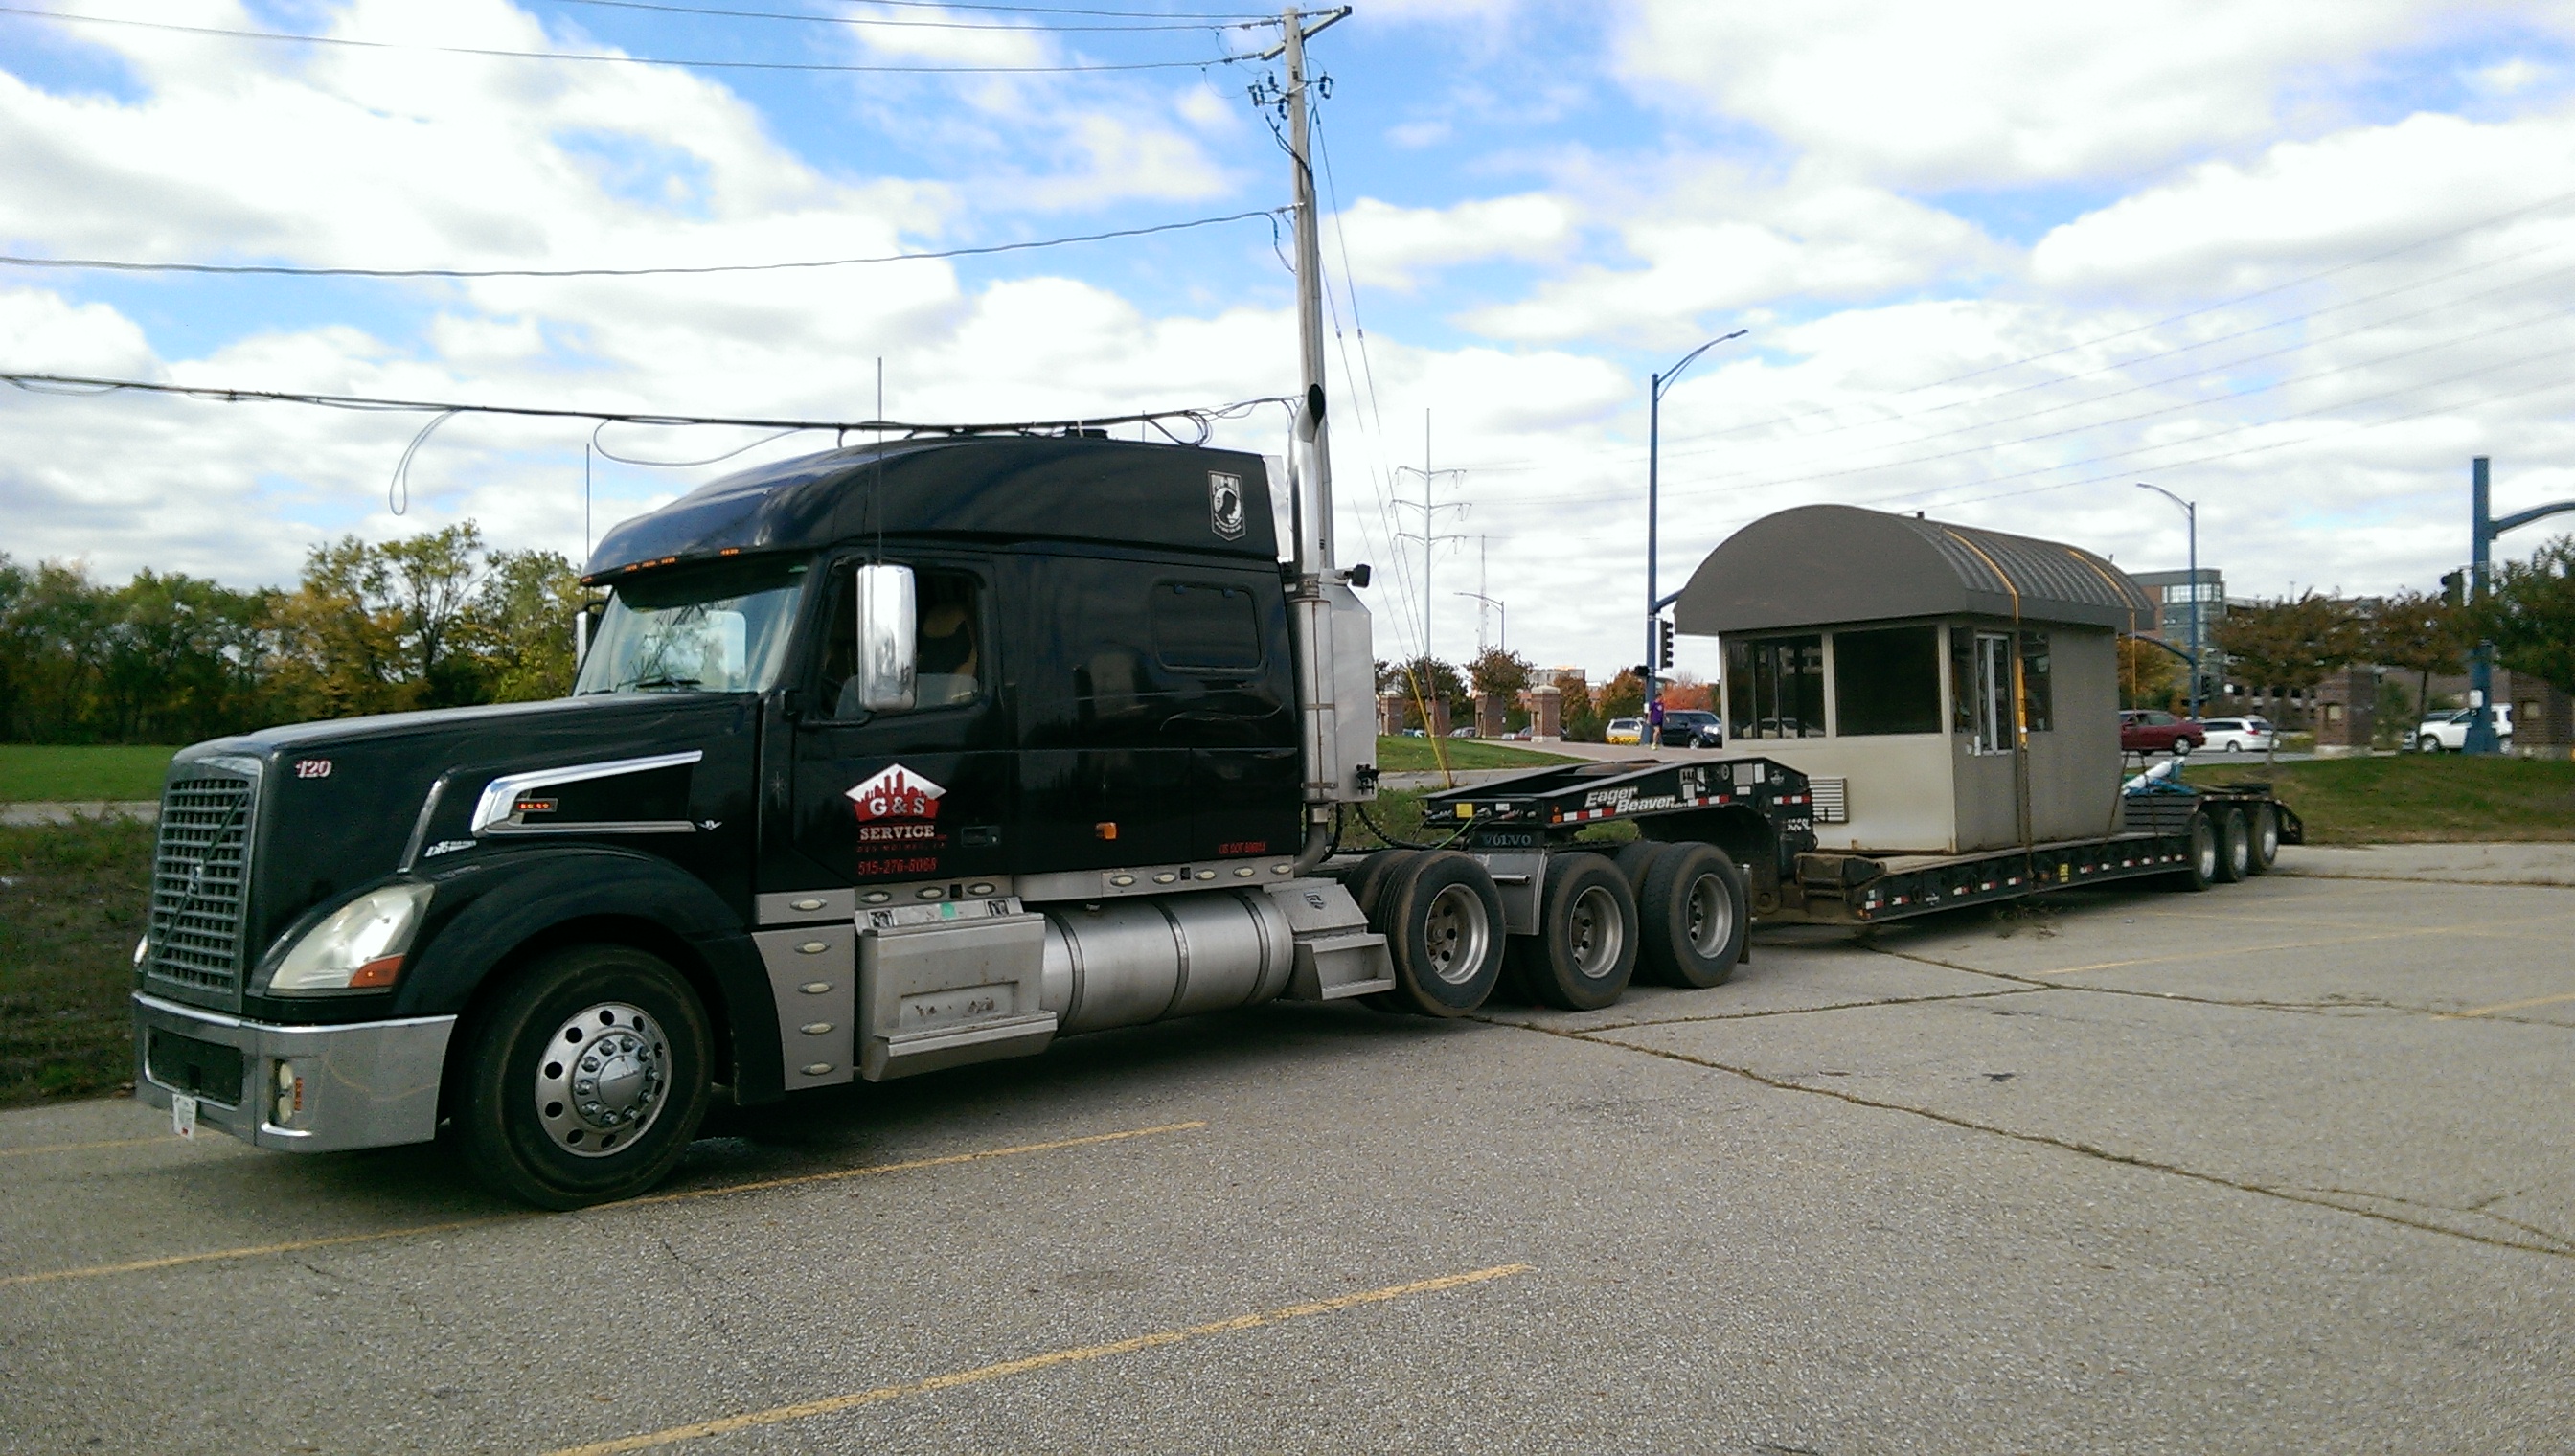 G & S Towing Service, Inc 4100 E 16th St Des Moines, IA 50313 - Towing - Local & Long Distance - Lock Out - Wheel Lifts - Flat Bed Trailers - Accident Recovery - Frame Forks - Slings http://towiowa.com/services/ https://www.facebook.com/G-S-Towing-Service-Inc-269127163133387/